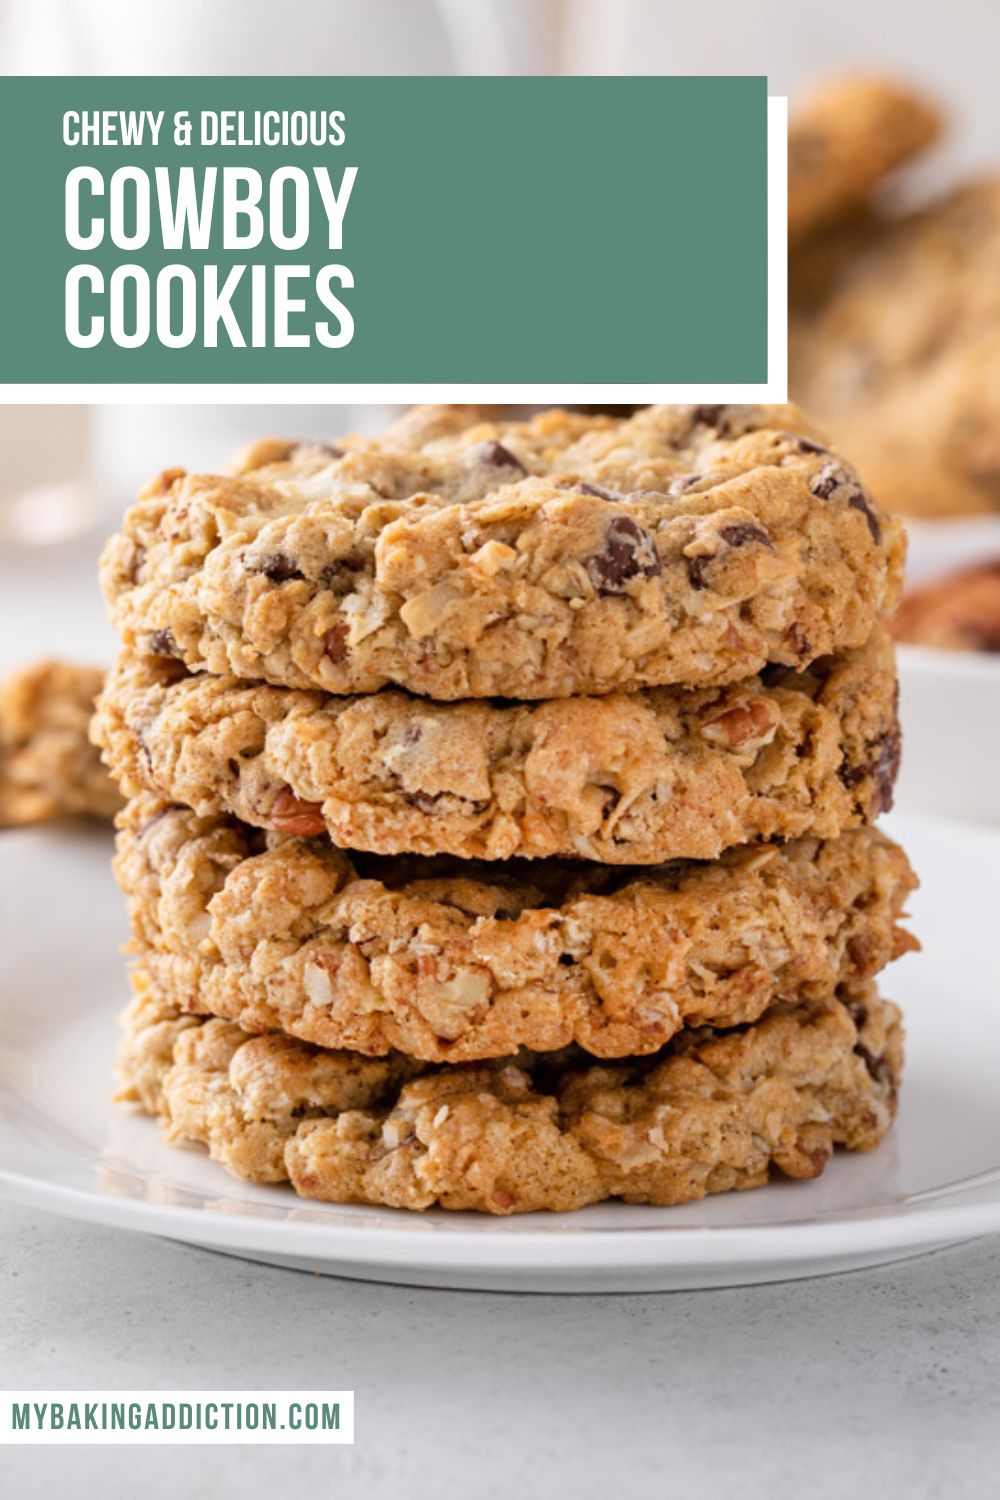 White plate holding a stack of 4 cowboy cookies. Additional cookies and a bowl of chocolate chips are visible in the background. Text overlay includes recipe name.